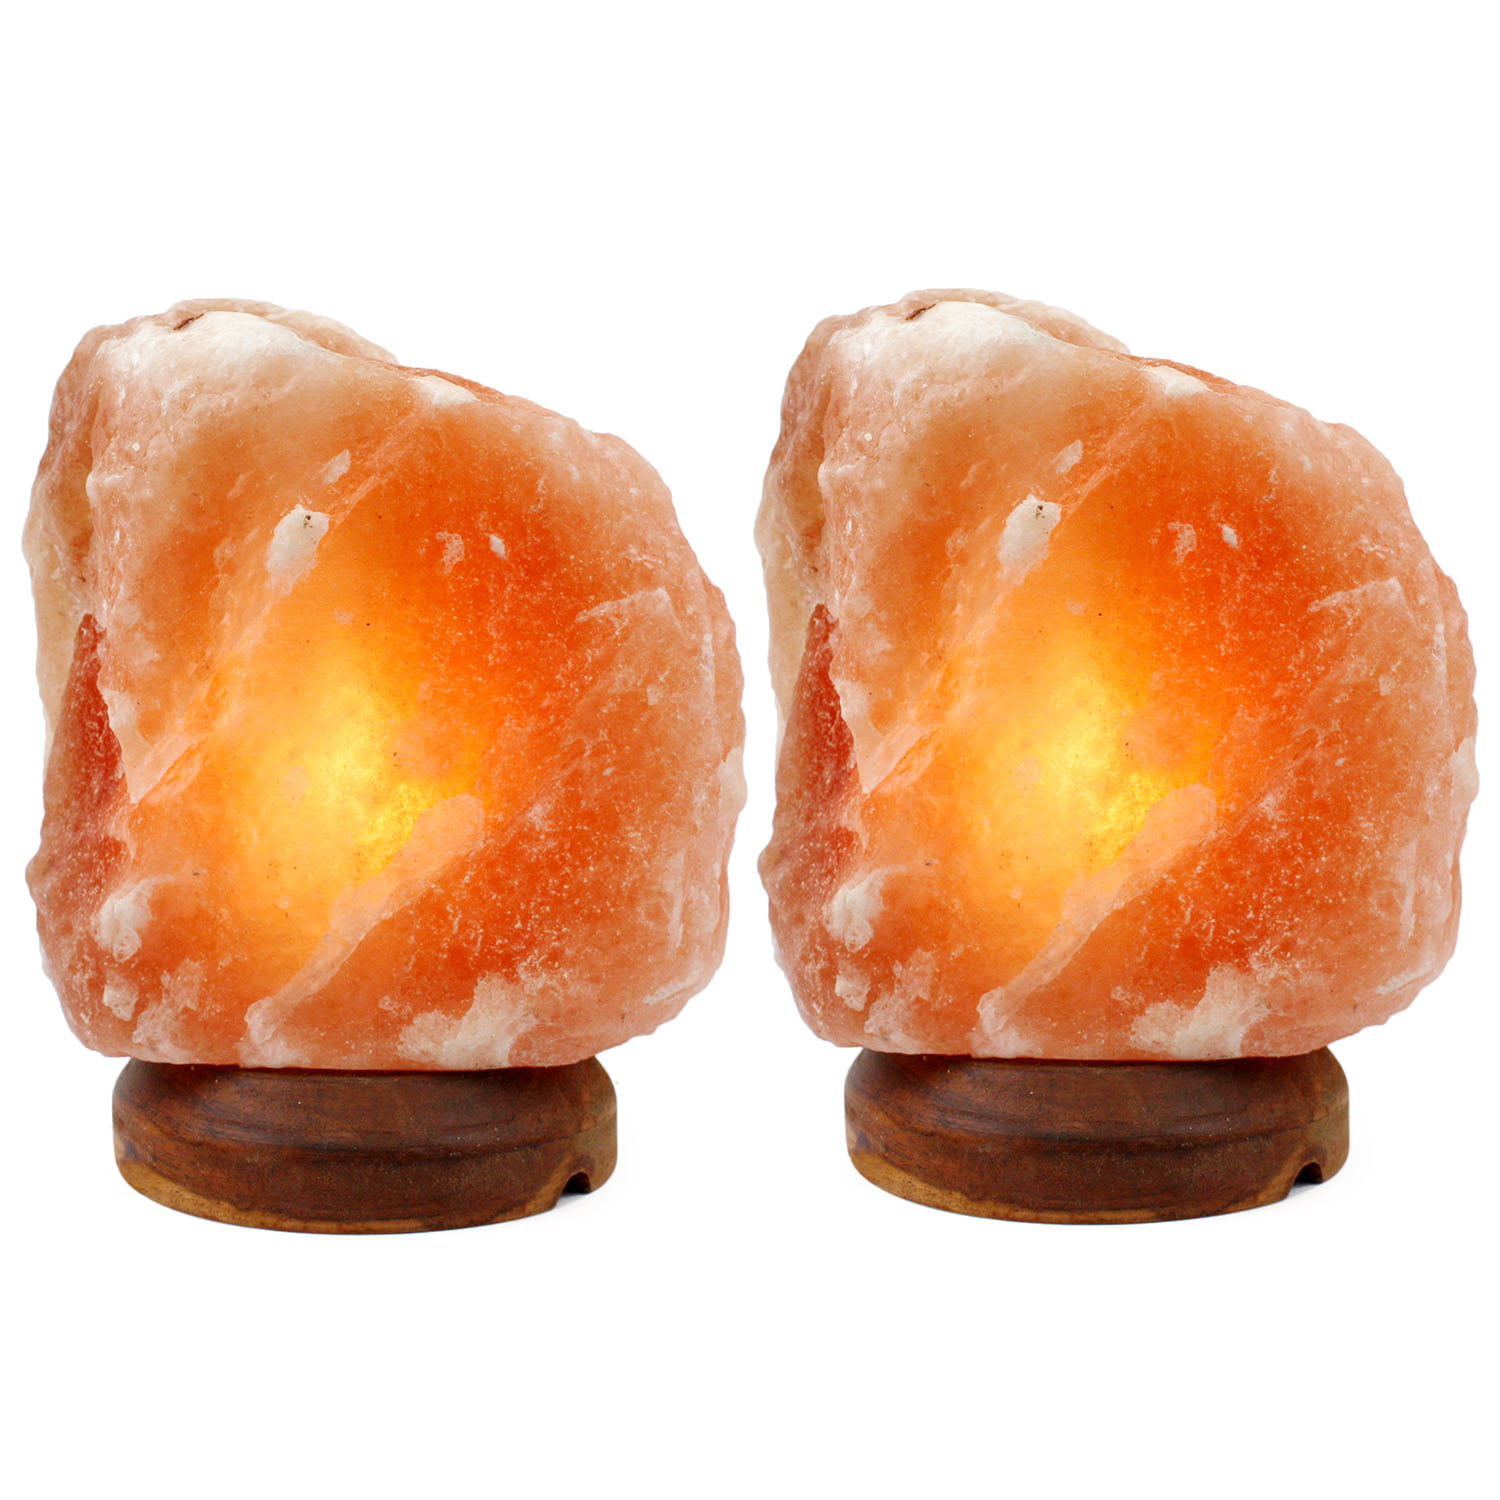 Crystal Allies Natural Himalayan Salt Lamp on Wood Base w/ Dimmable Cord 2pc 